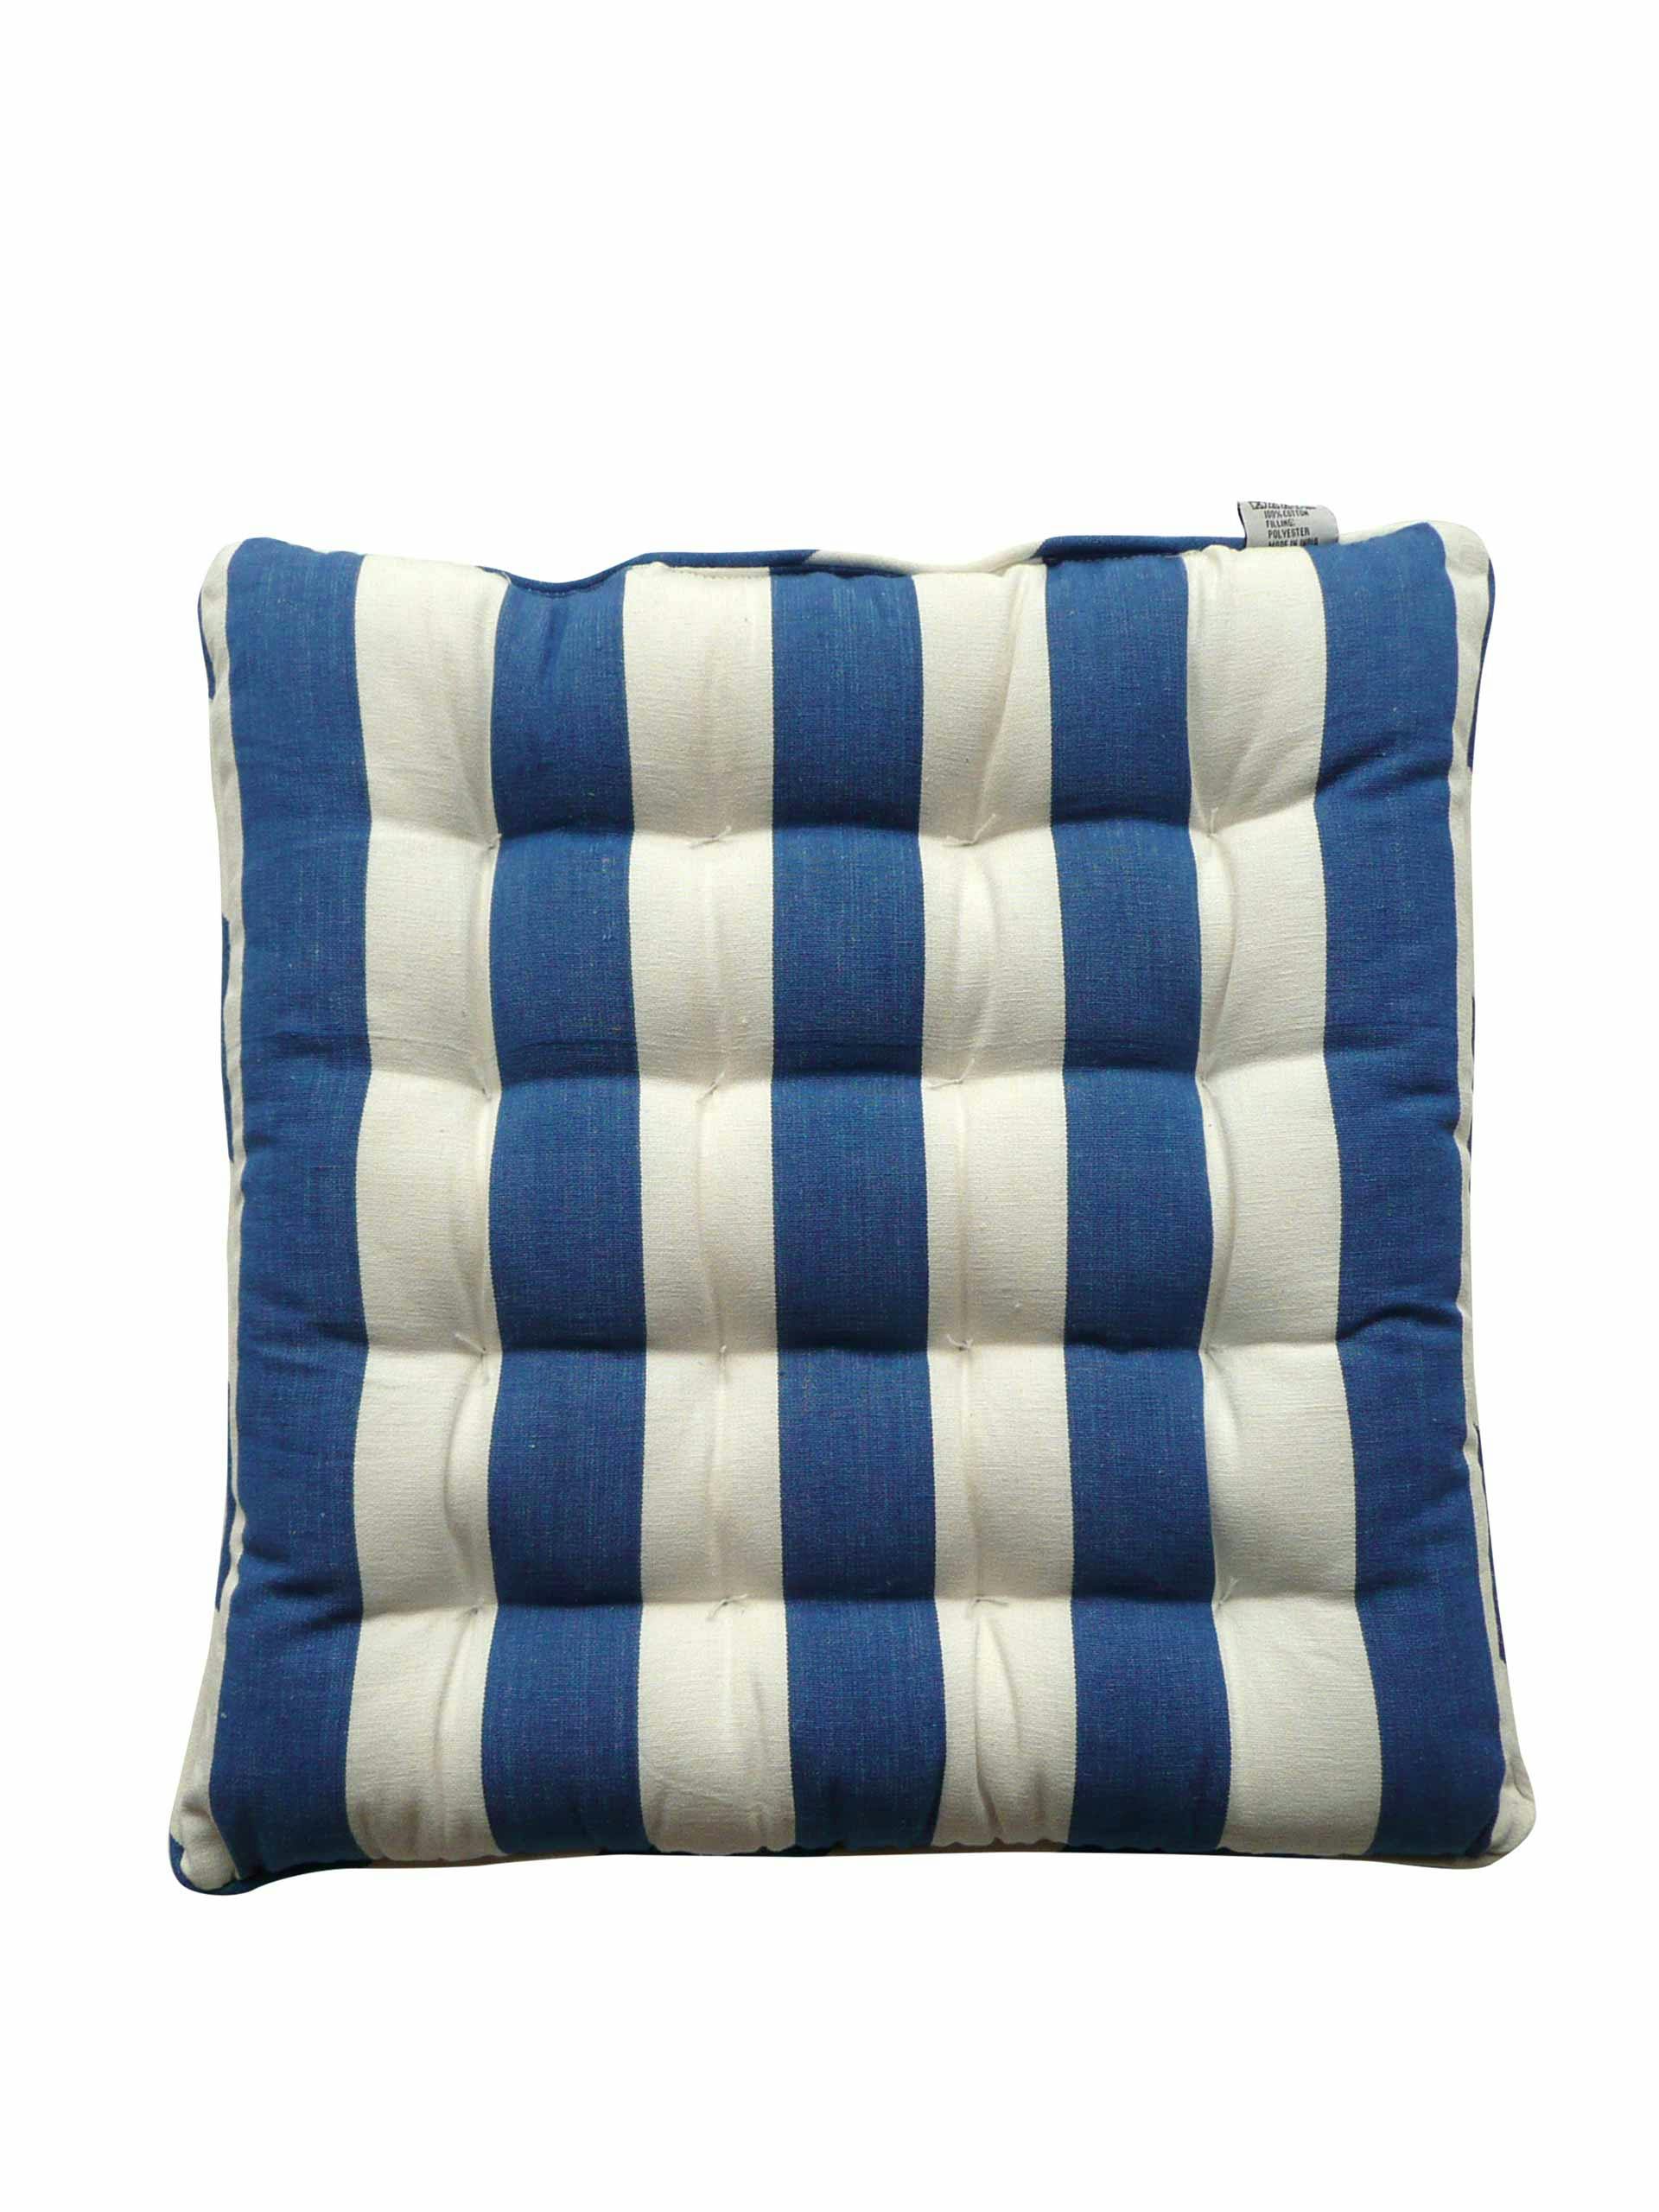 Blue and white seat pad